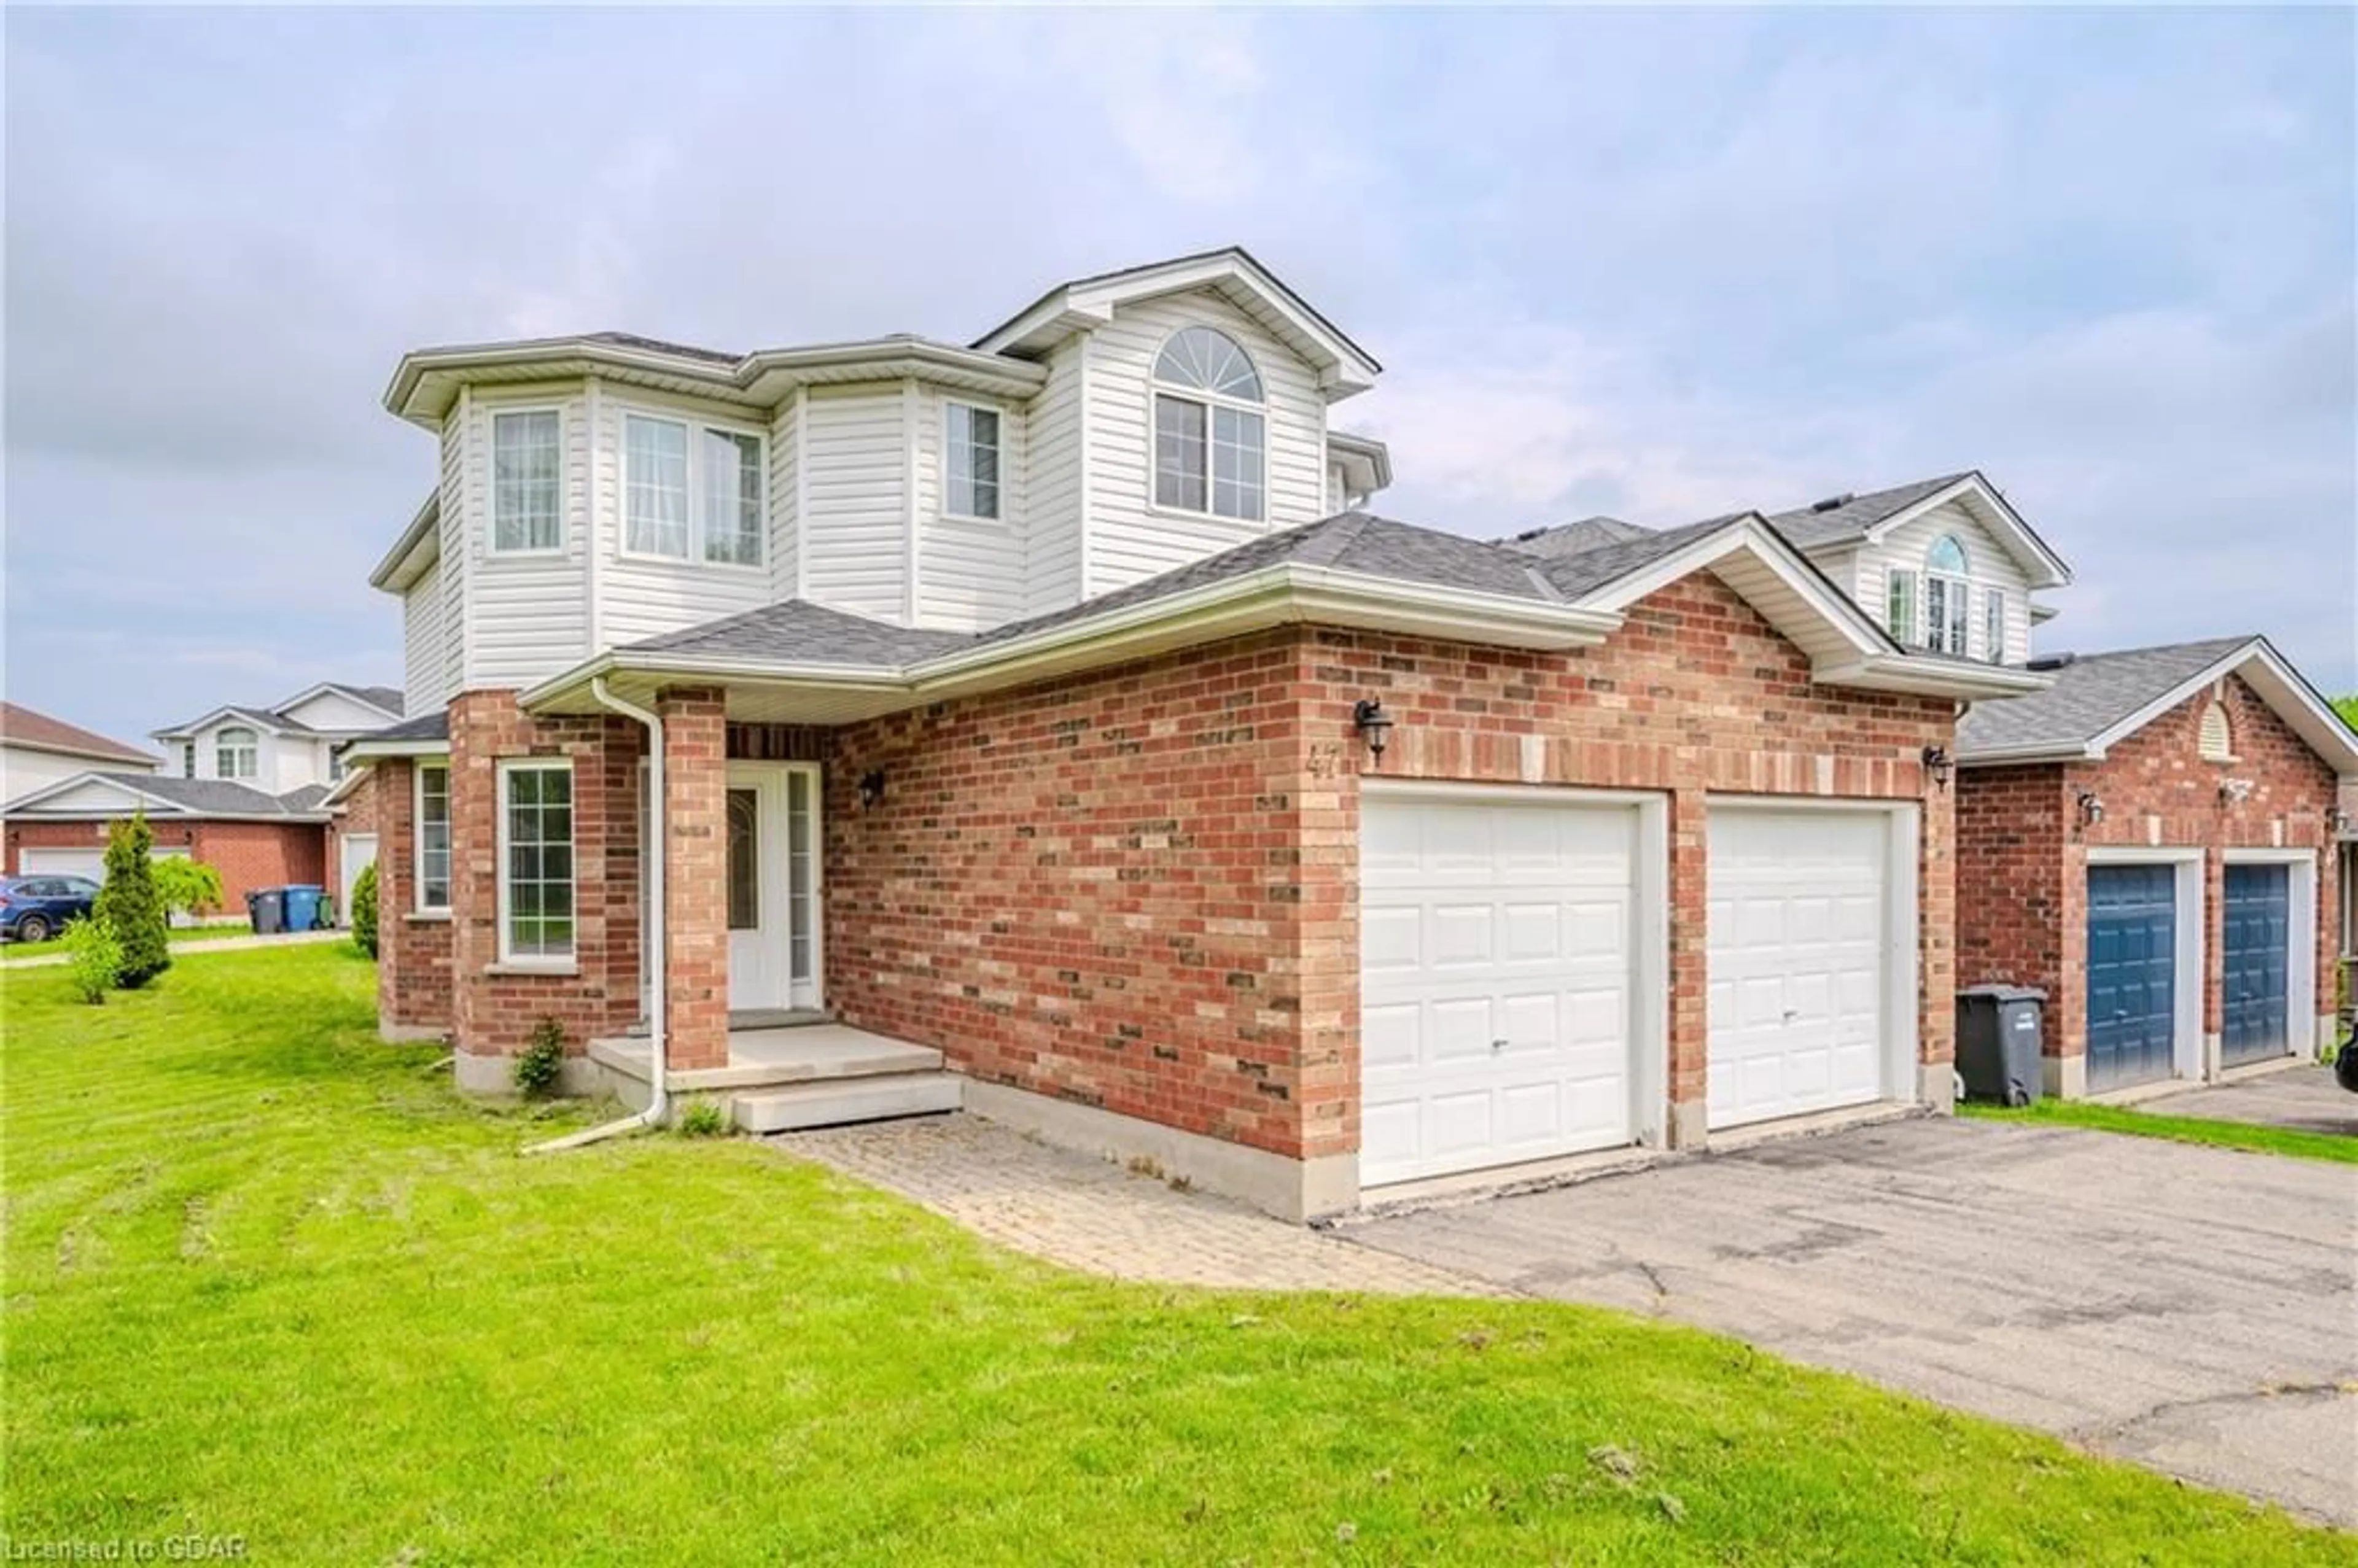 Home with brick exterior material for 47 Bond Crt, Guelph Ontario N1H 8N6